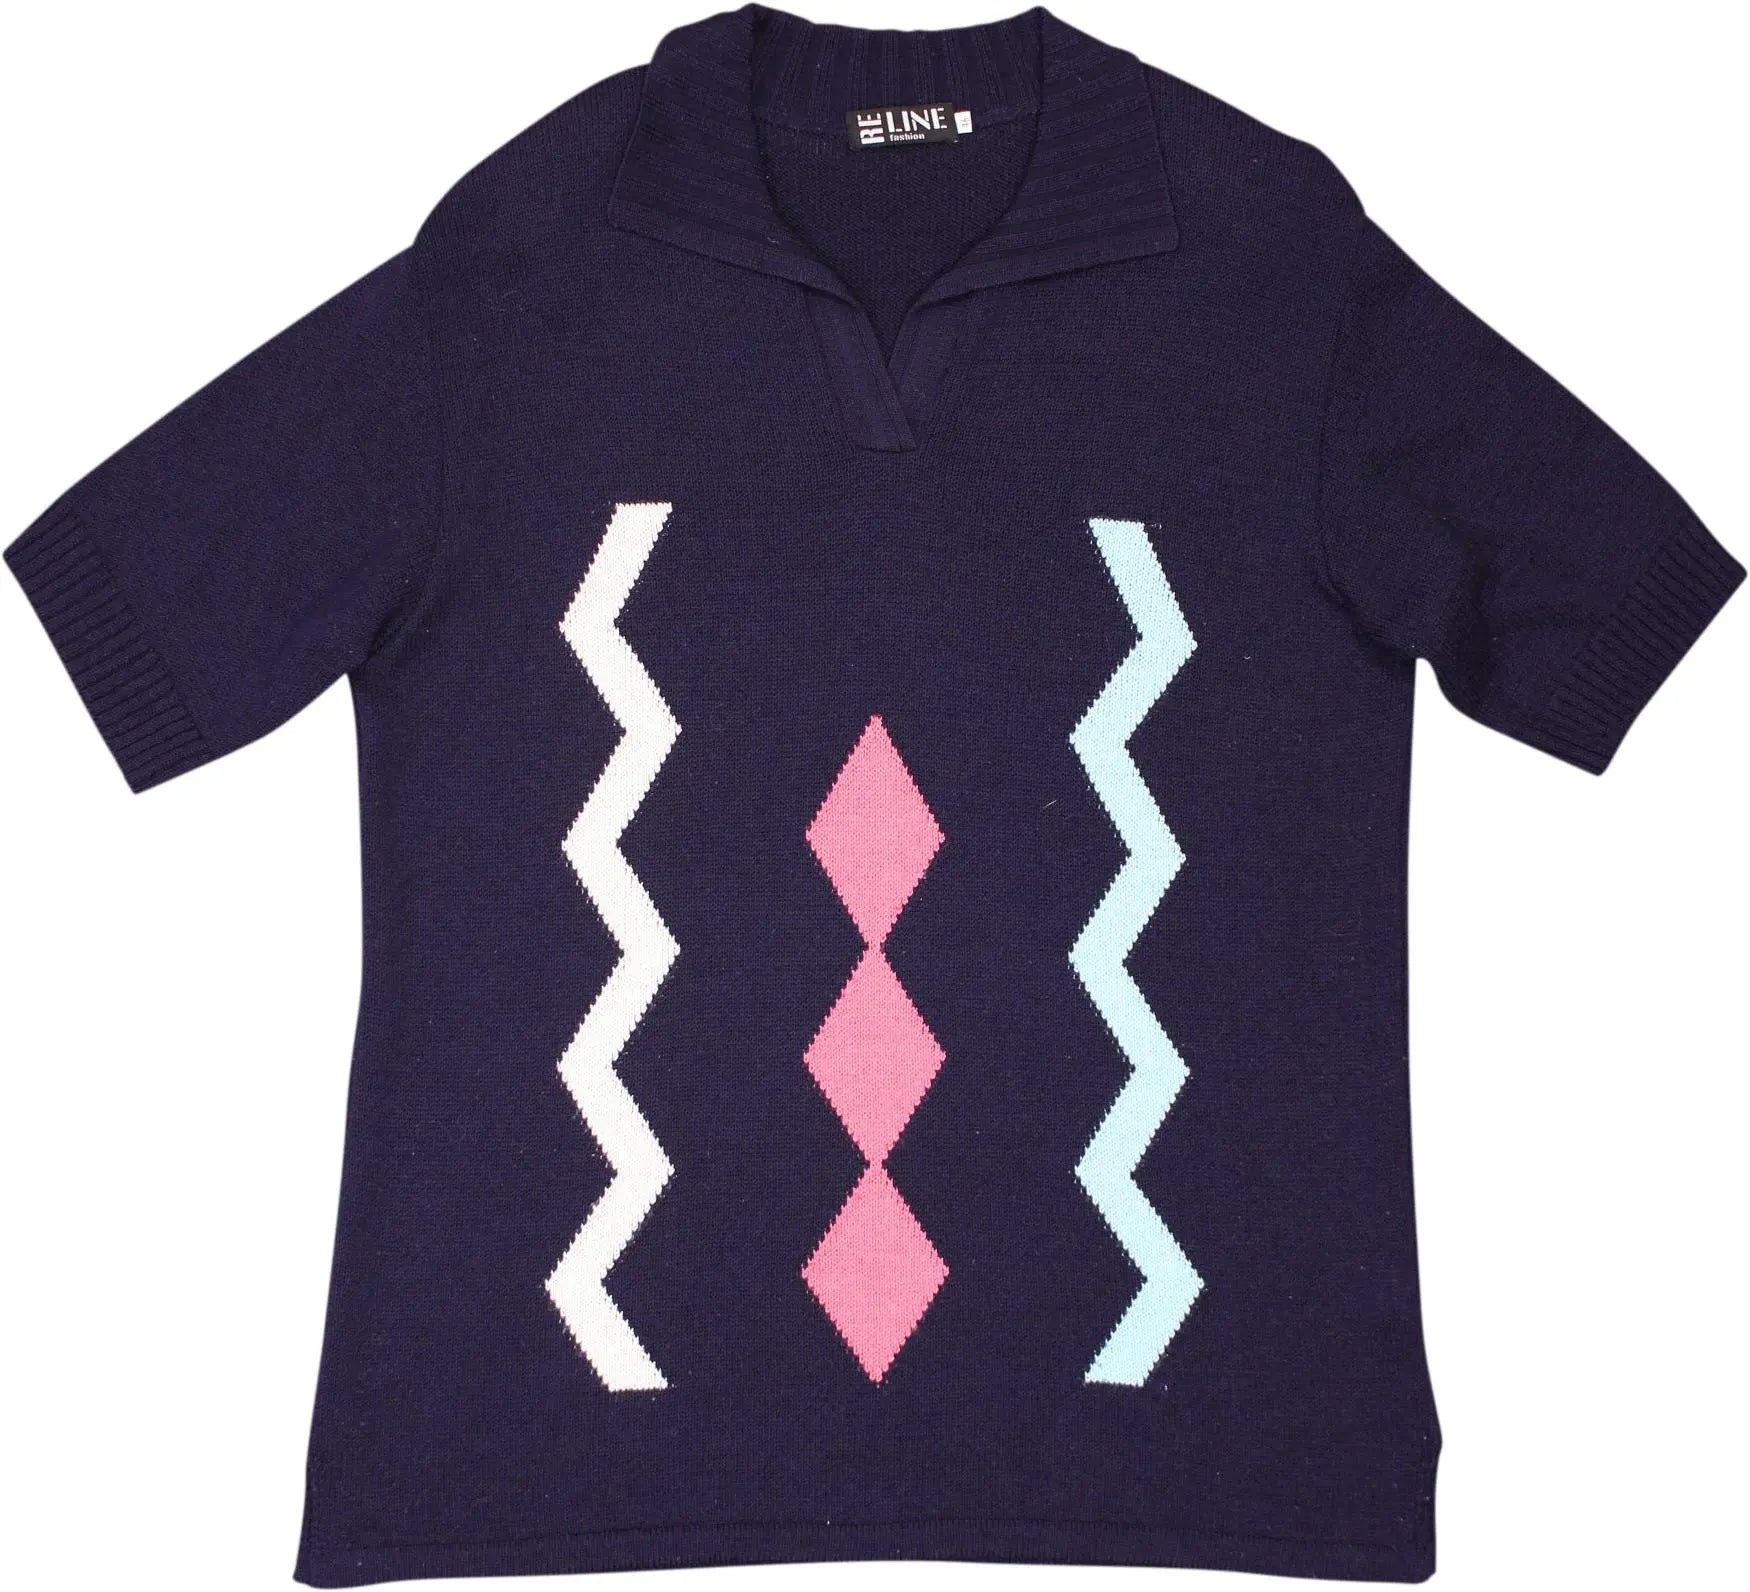 Reline Fashion - Argyle Knit Shirt- ThriftTale.com - Vintage and second handclothing